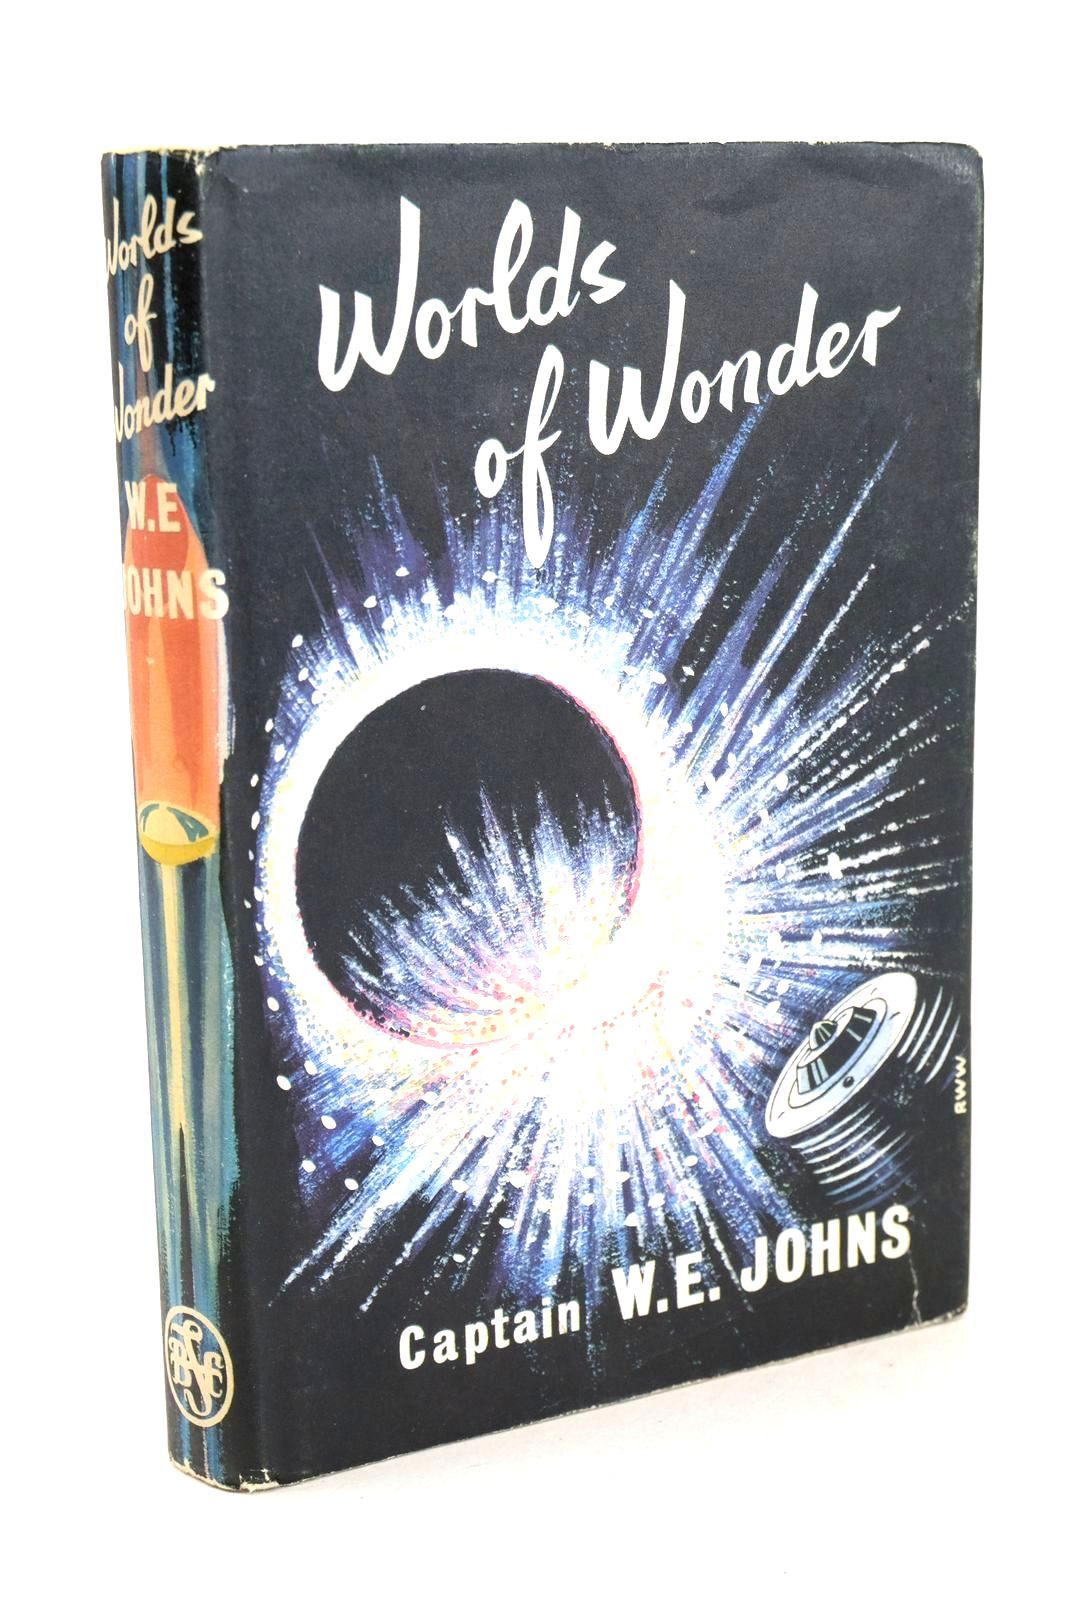 Photo of WORLDS OF WONDER written by Johns, W.E. published by The Children's Book Club (STOCK CODE: 1326027)  for sale by Stella & Rose's Books